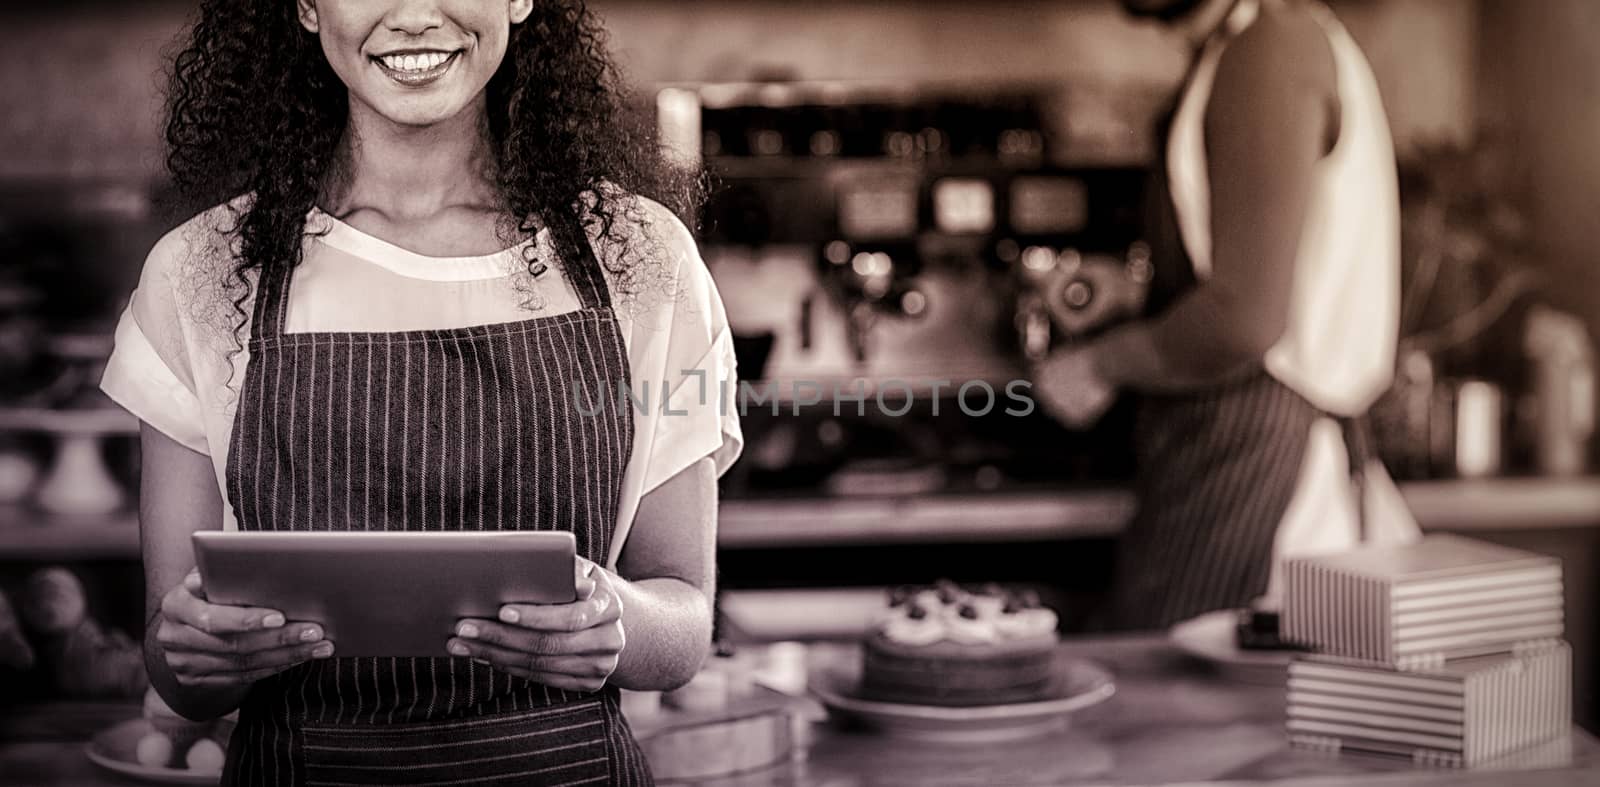 Portrait of smiling waitress using digital tablet at counter in cafÃ©